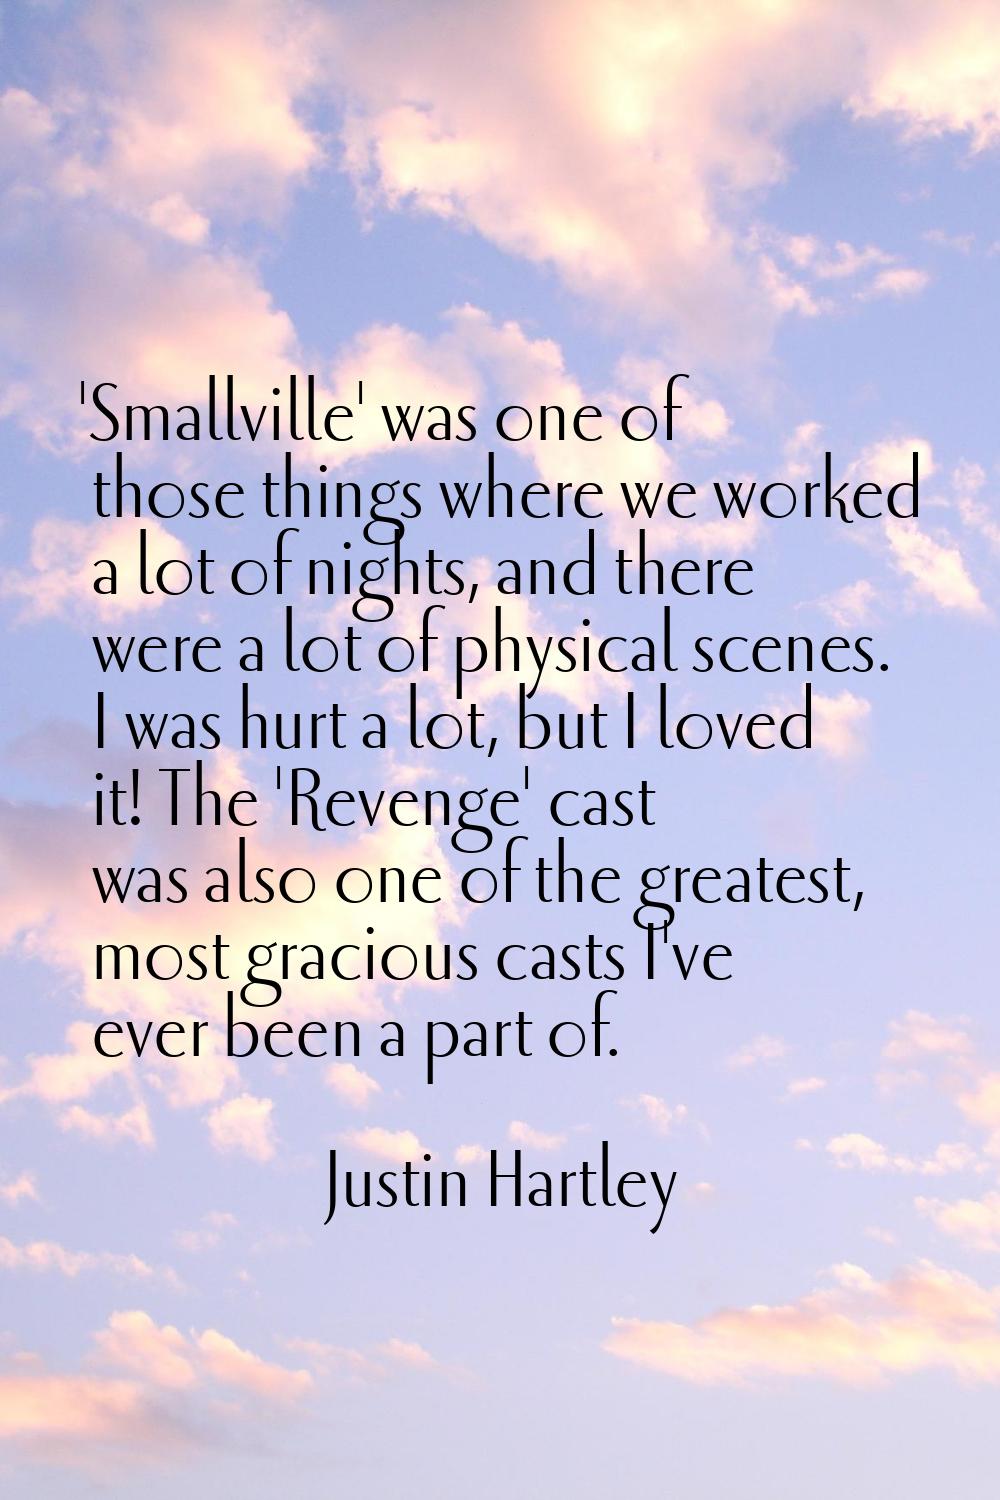 'Smallville' was one of those things where we worked a lot of nights, and there were a lot of physi